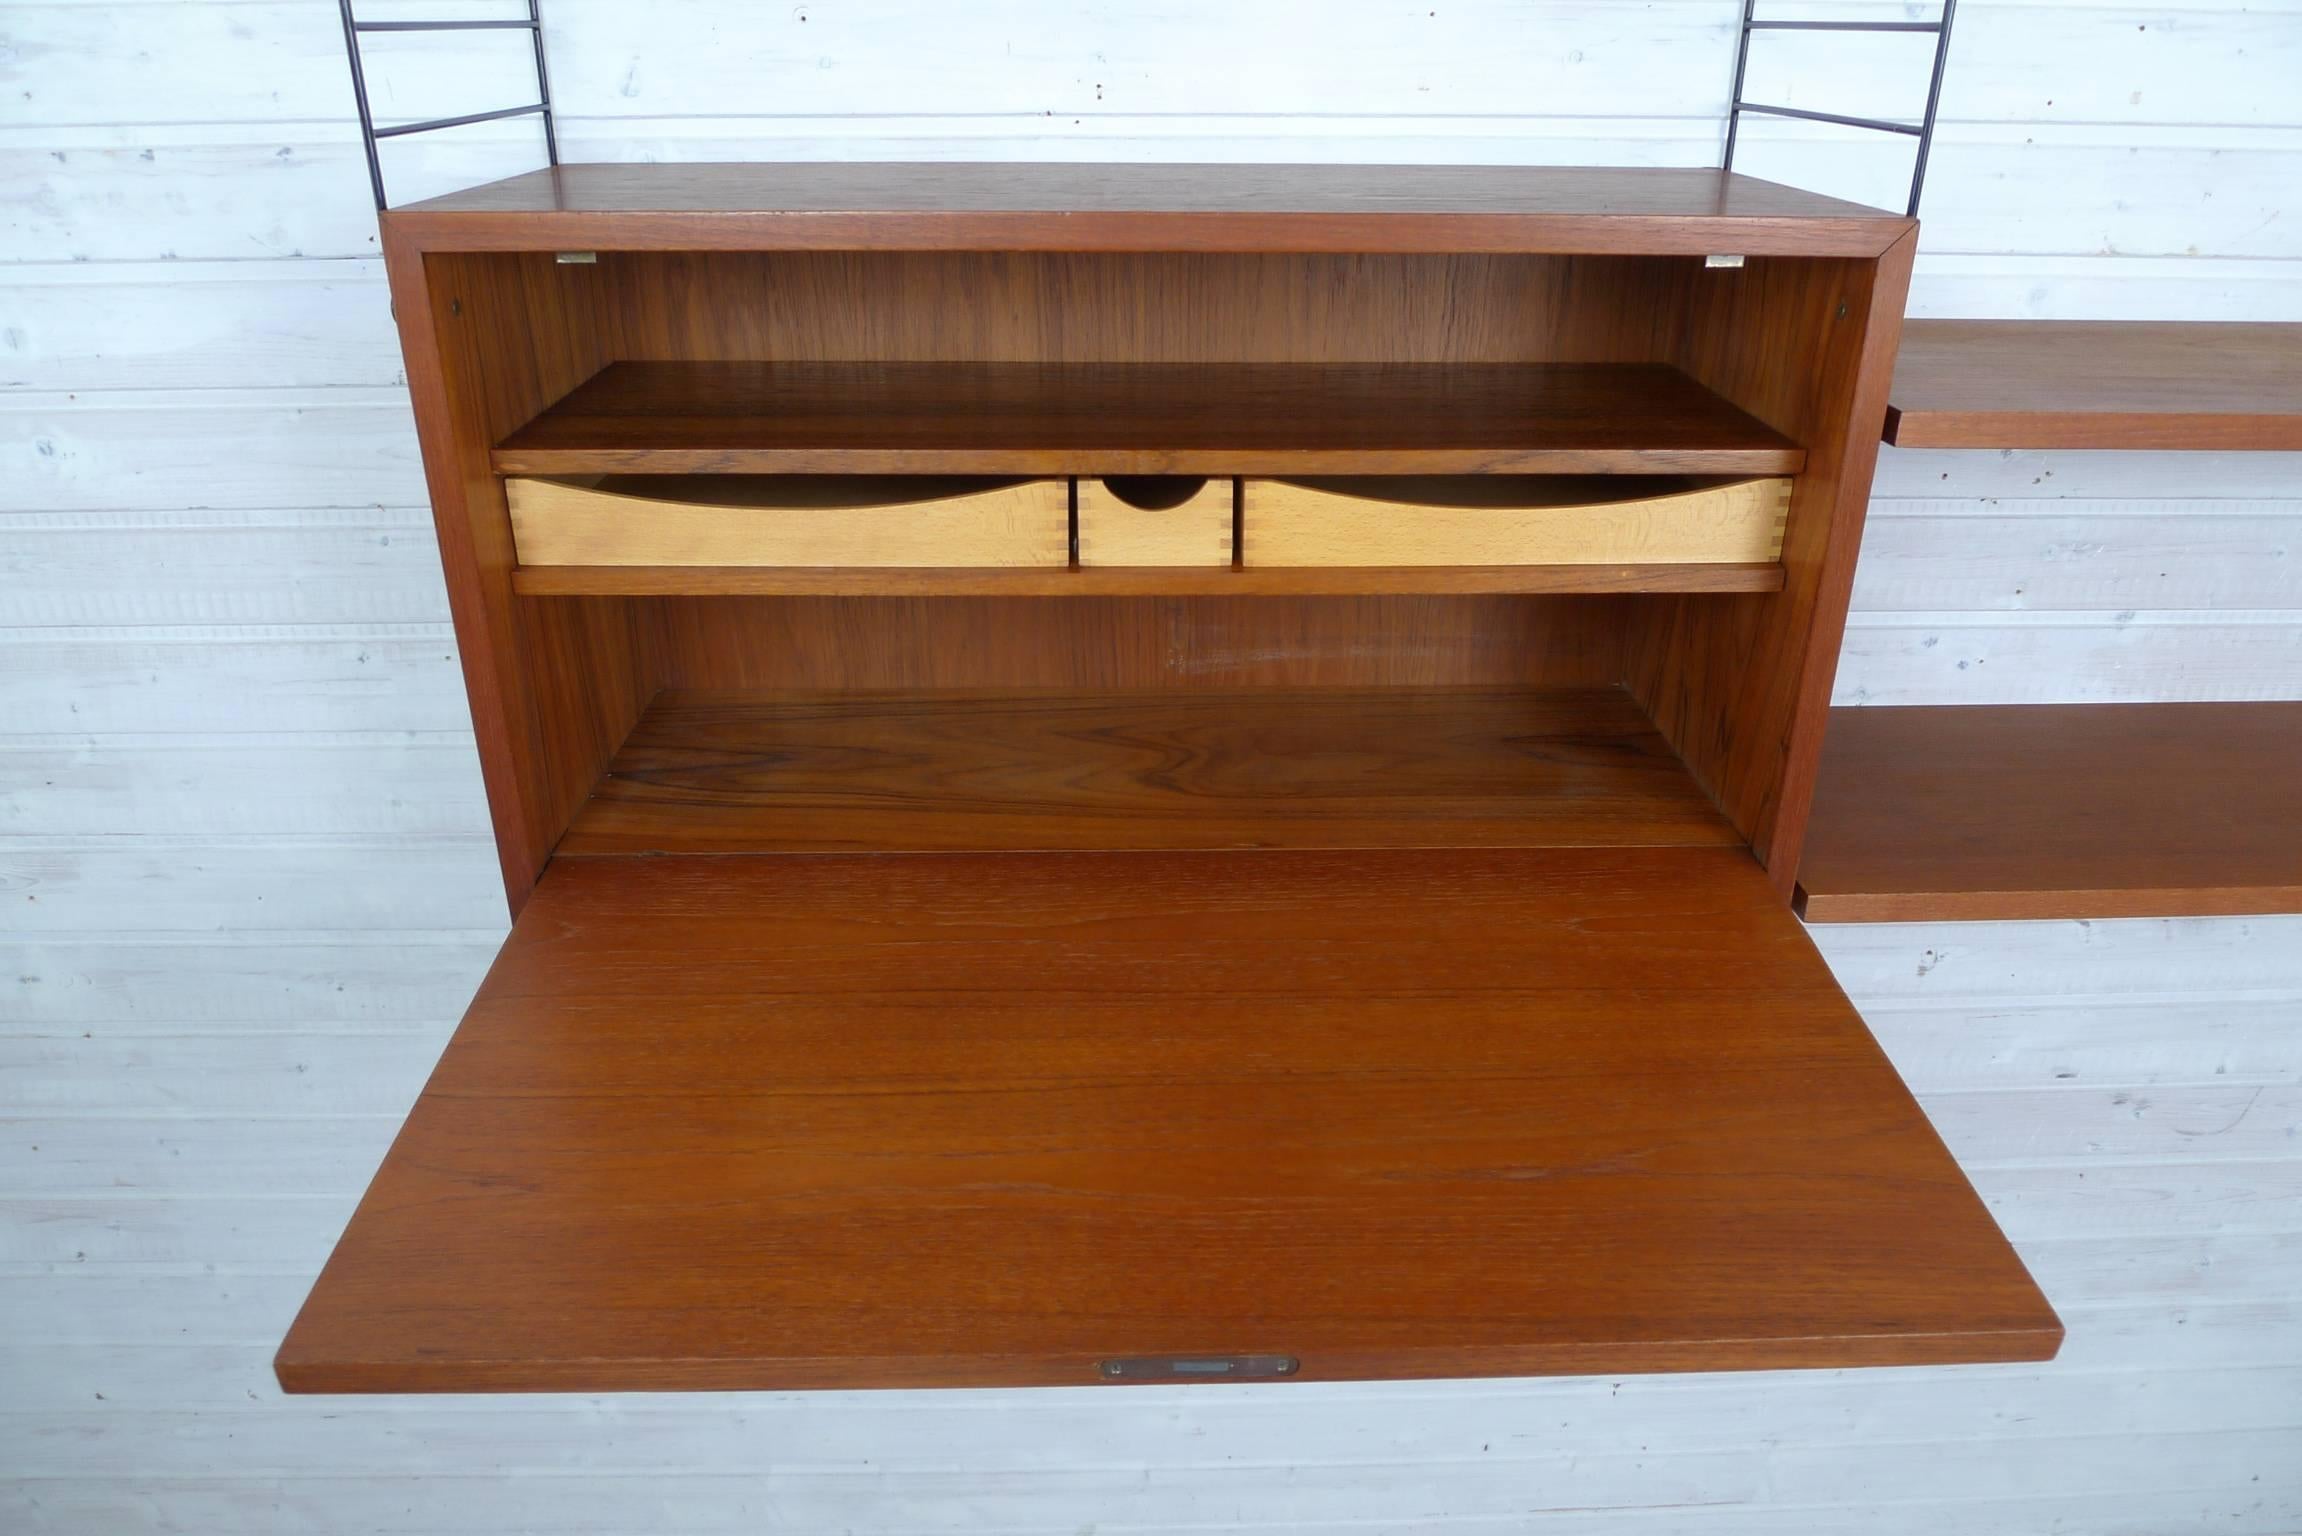 Metal Swedish Wall Unit with Teak Box and Shelves by Nisse Strinning for String, 1950s For Sale